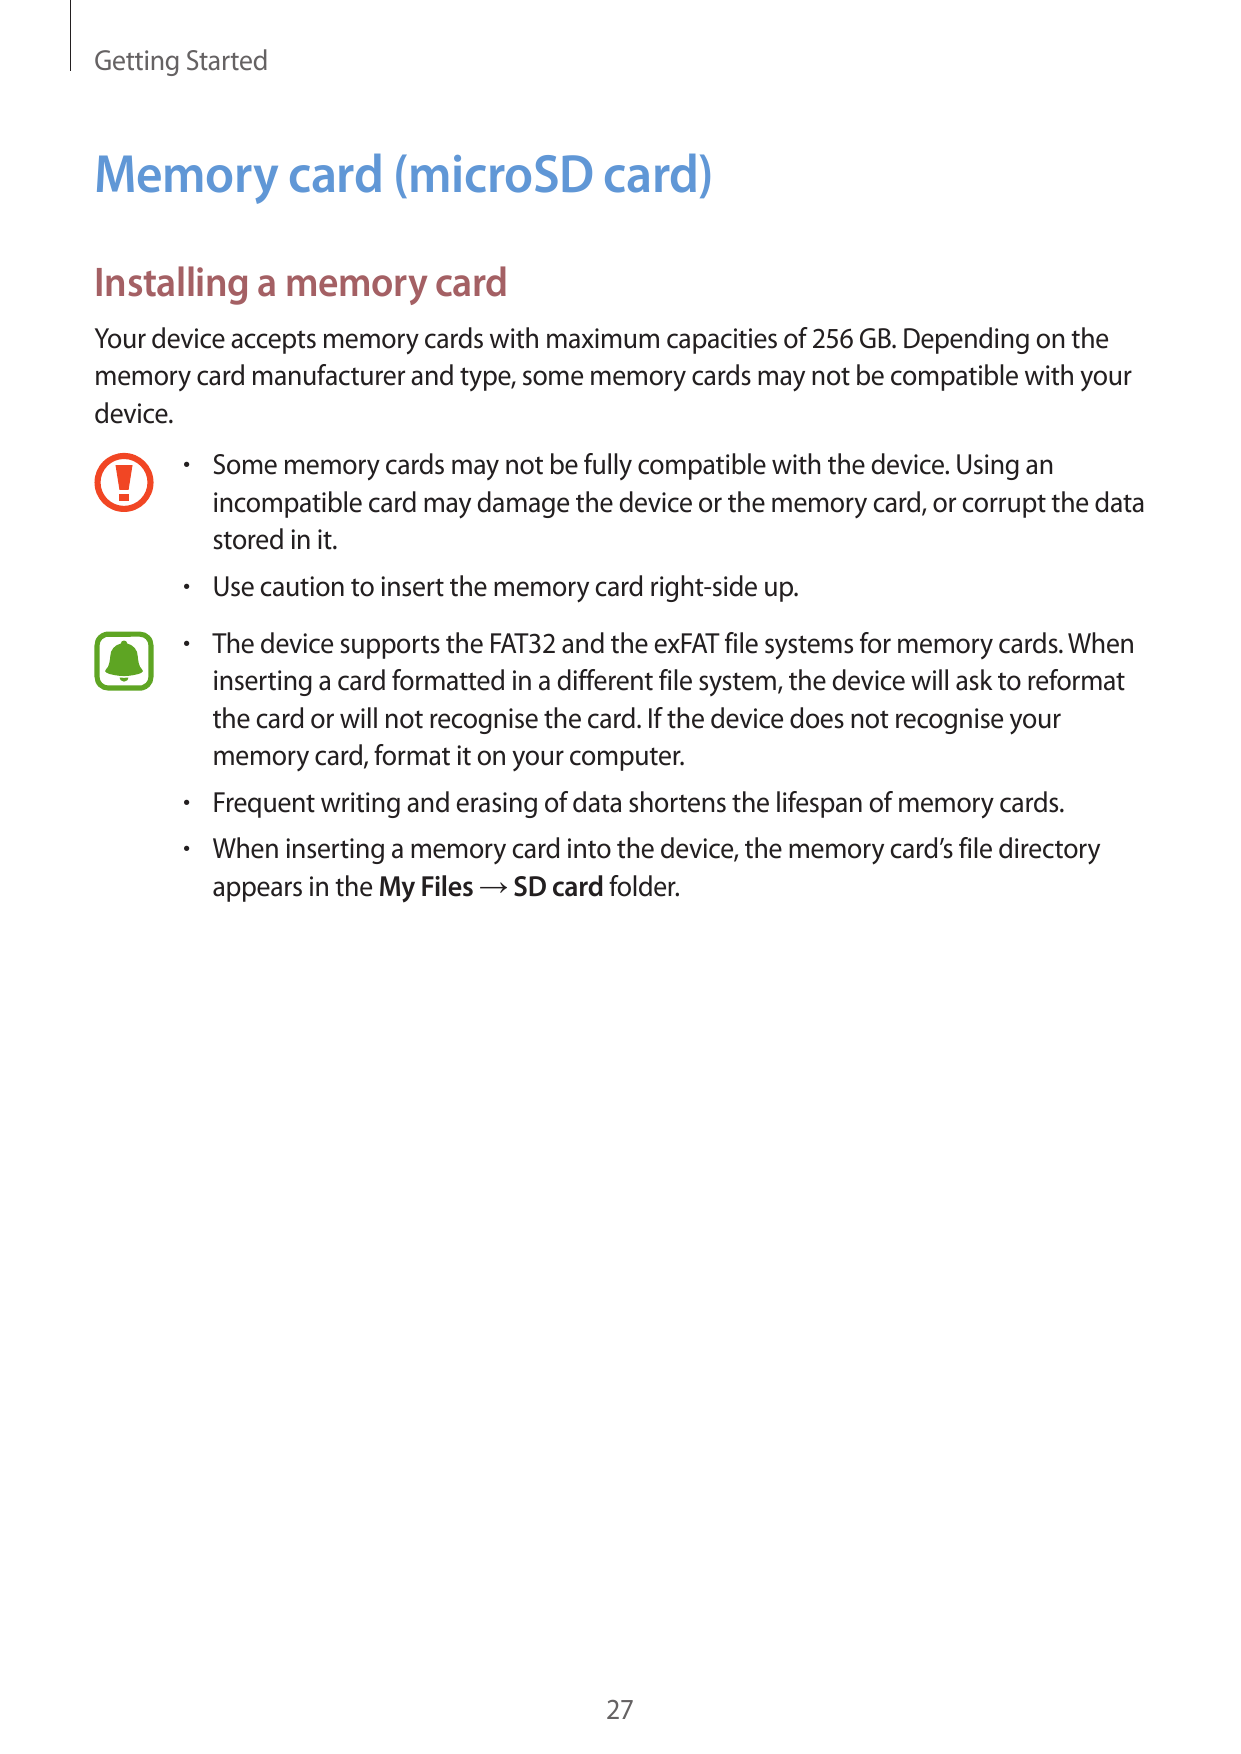 Getting StartedMemory card (microSD card)Installing a memory cardYour device accepts memory cards with maximum capacities of 256